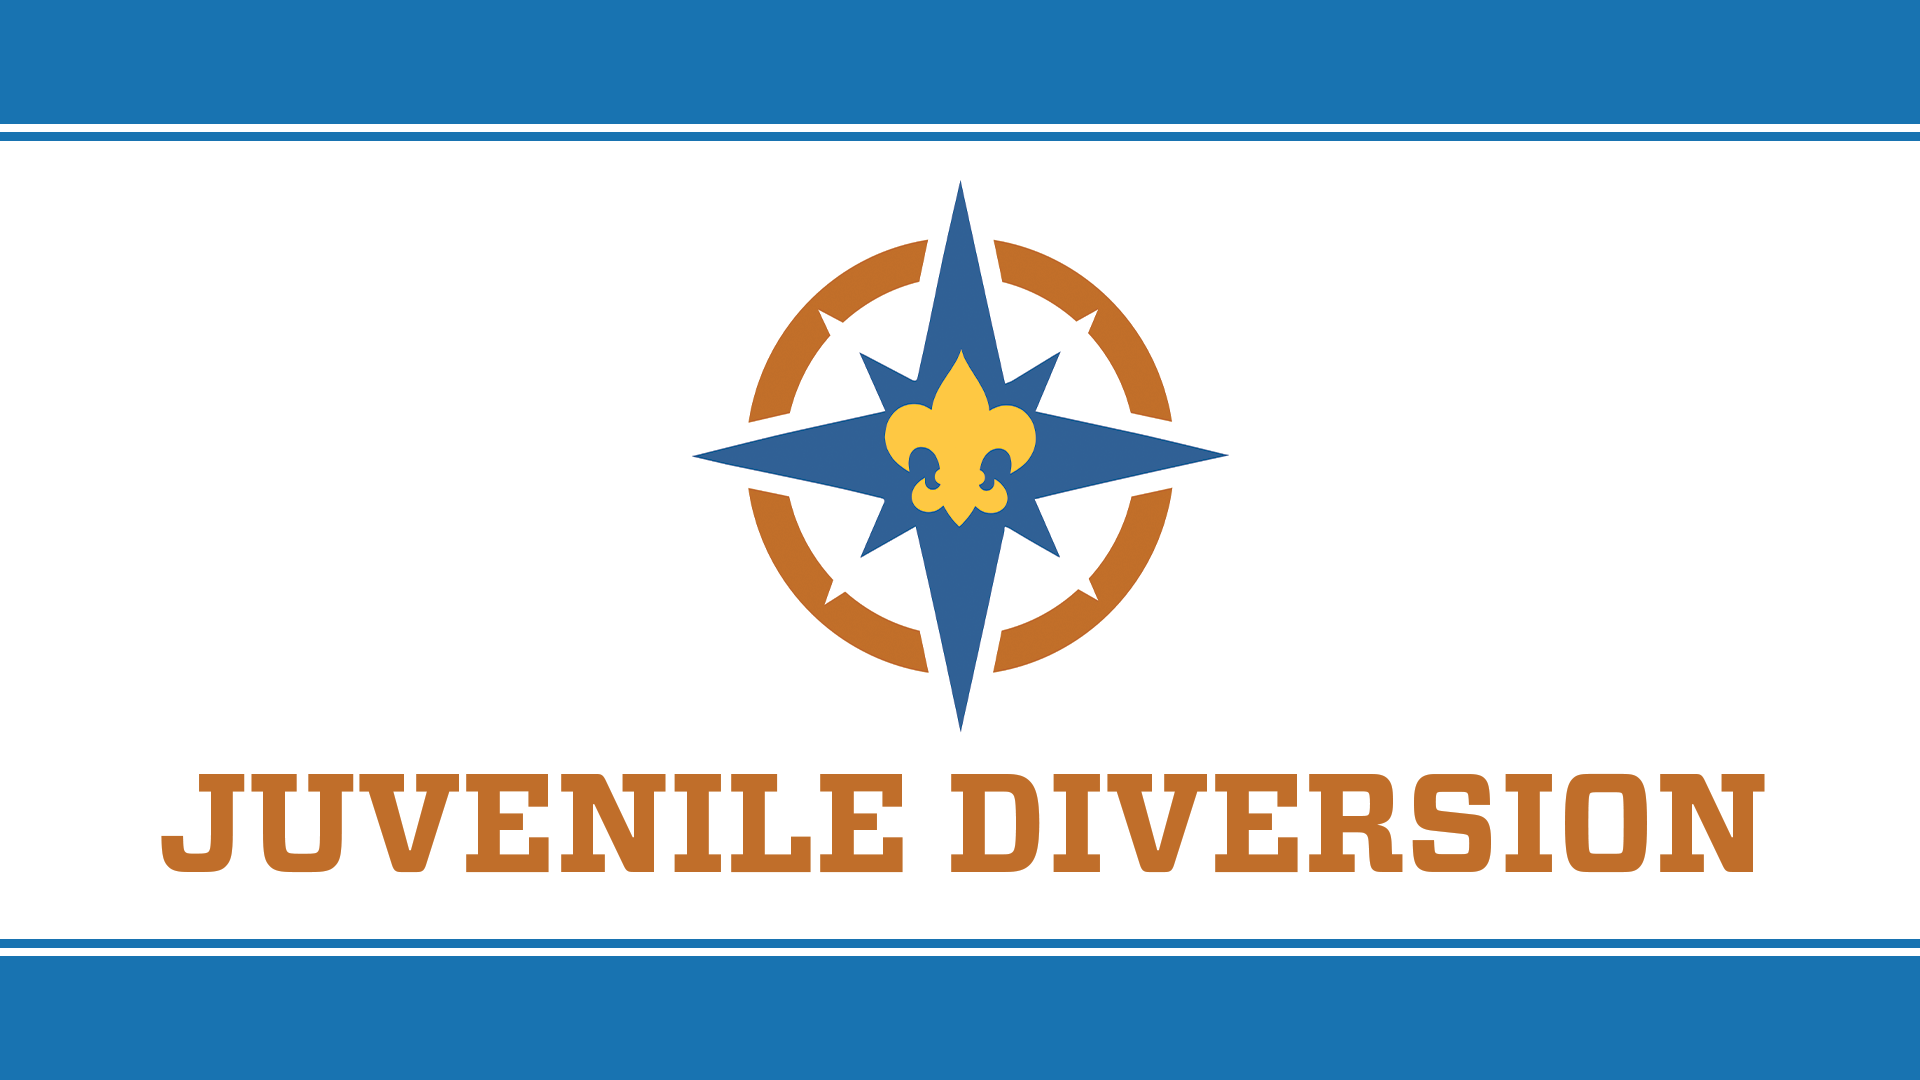 The Juvenile Diversion logo, a compass with the words "Juvenile Diversion" on a white and blue background.